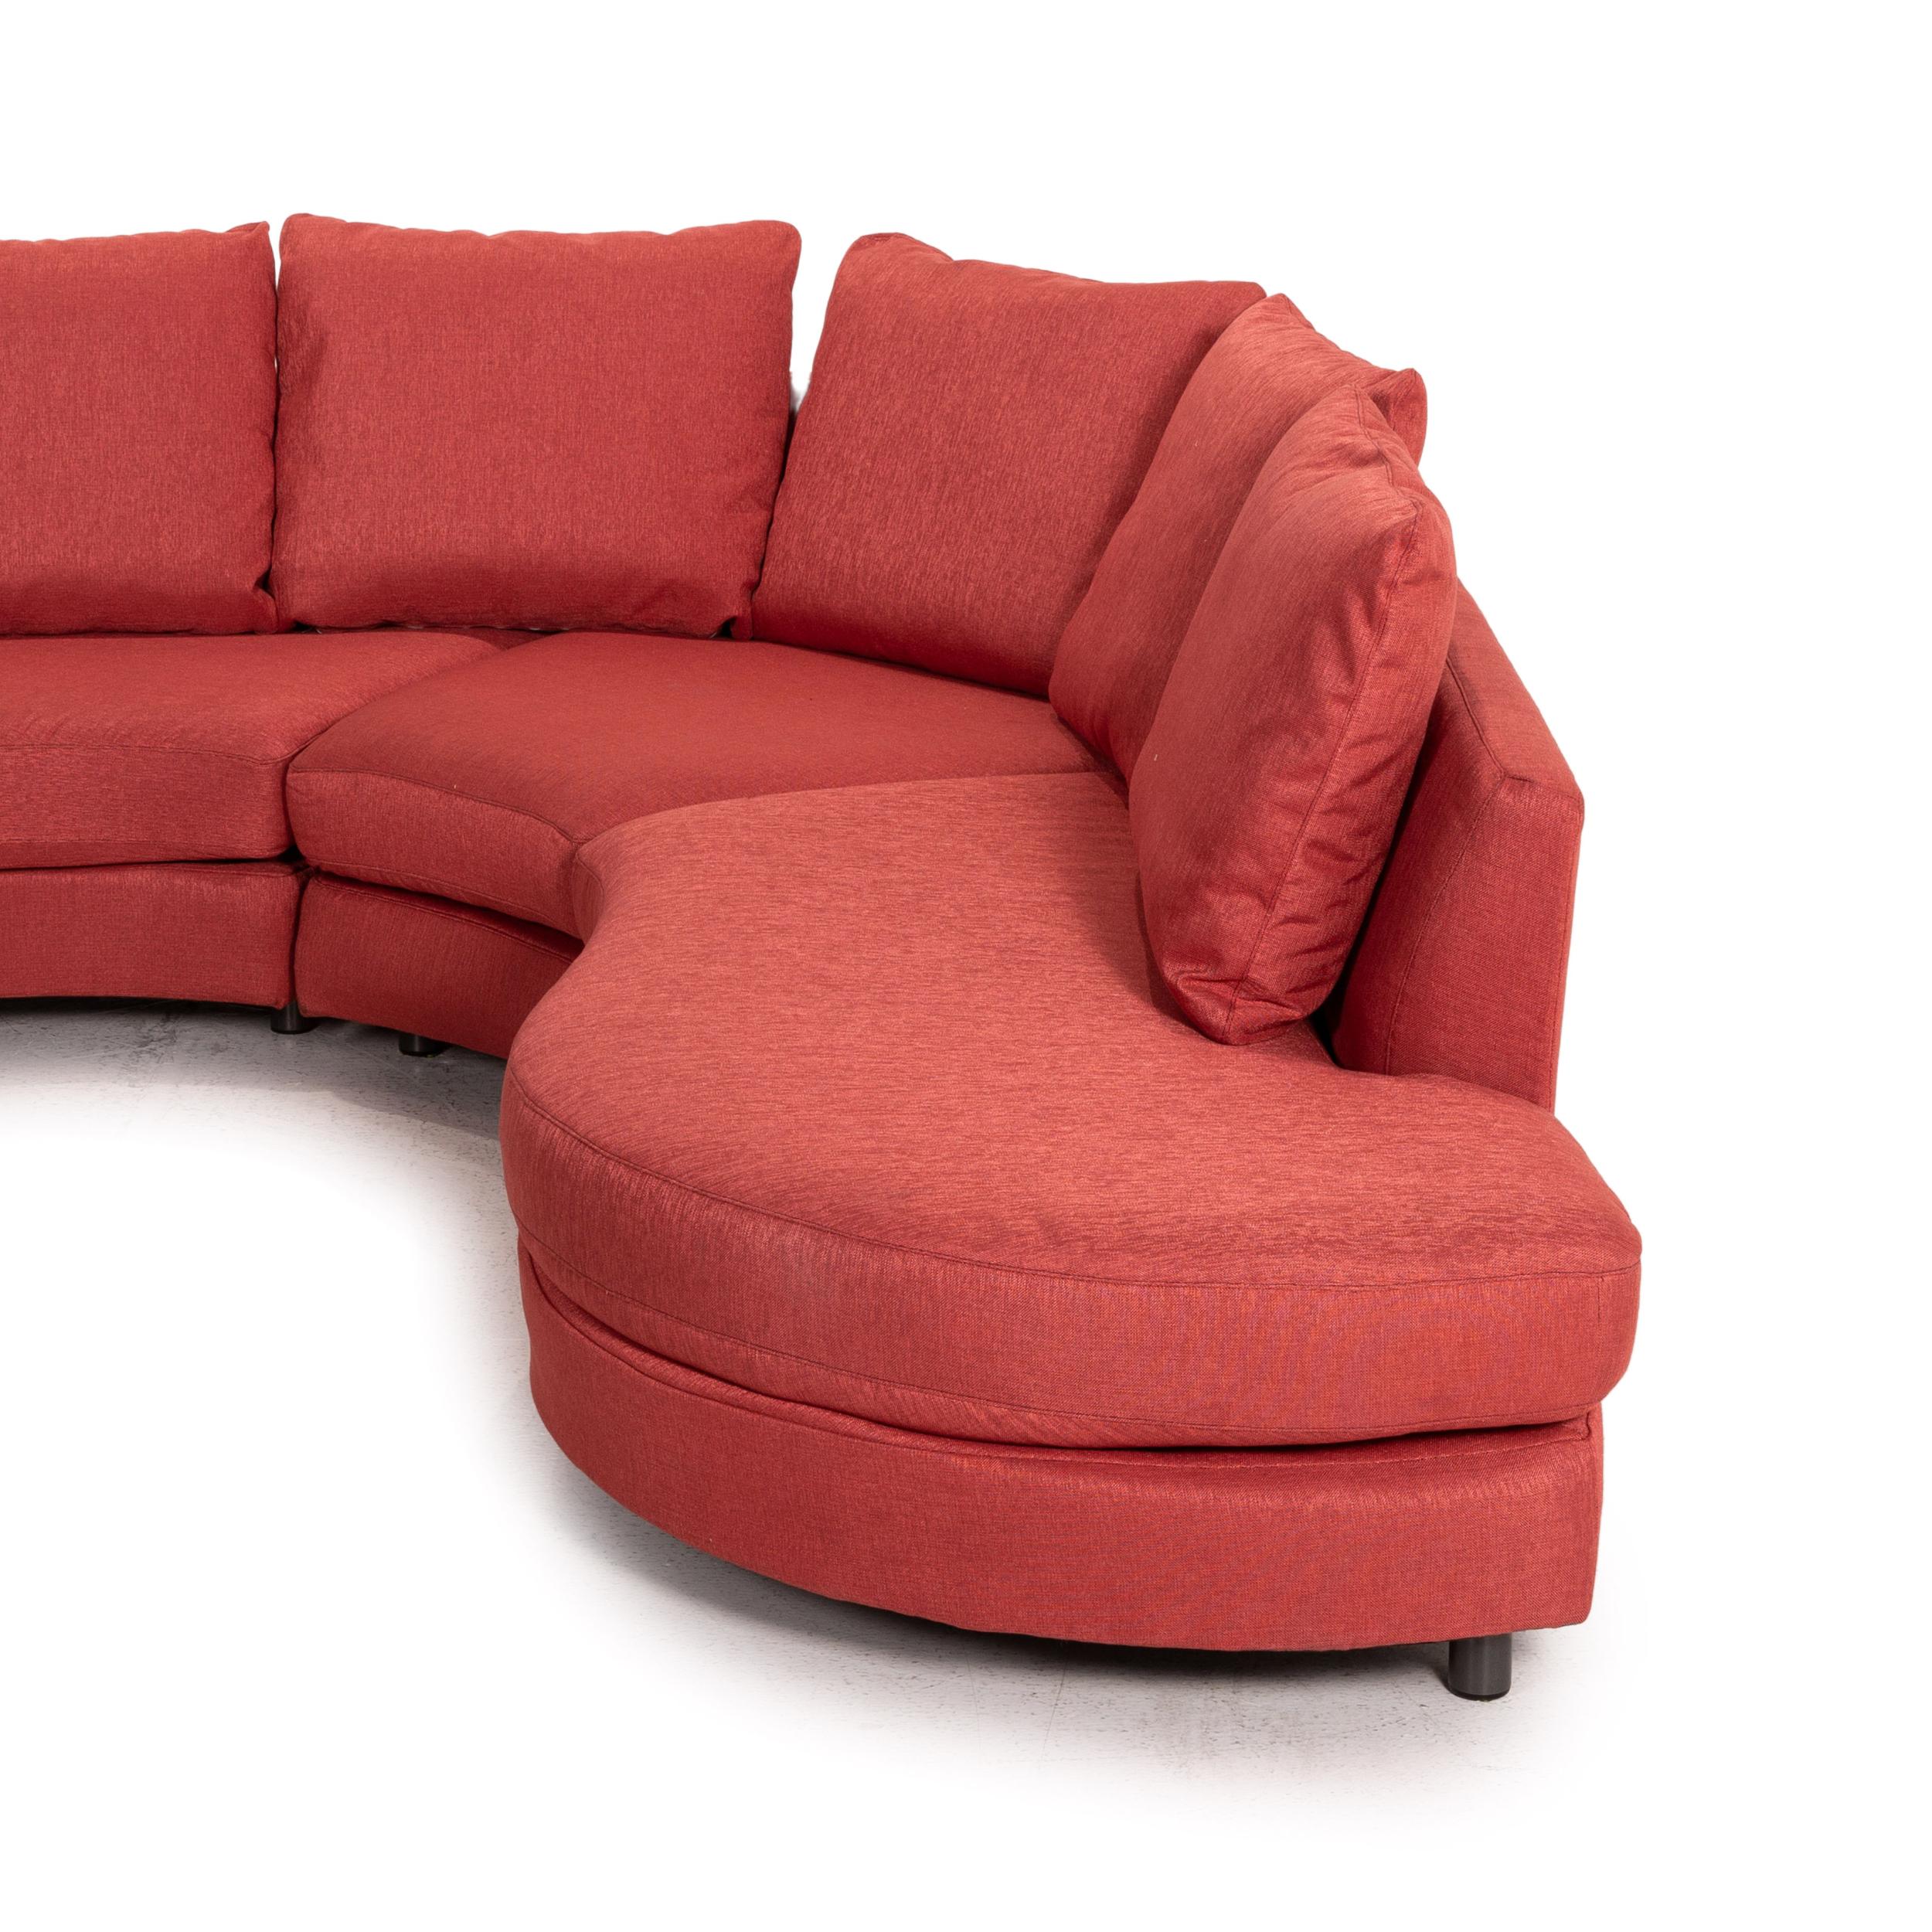 Contemporary Rolf Benz Fabric Corner Sofa Red Sofa Couch For Sale